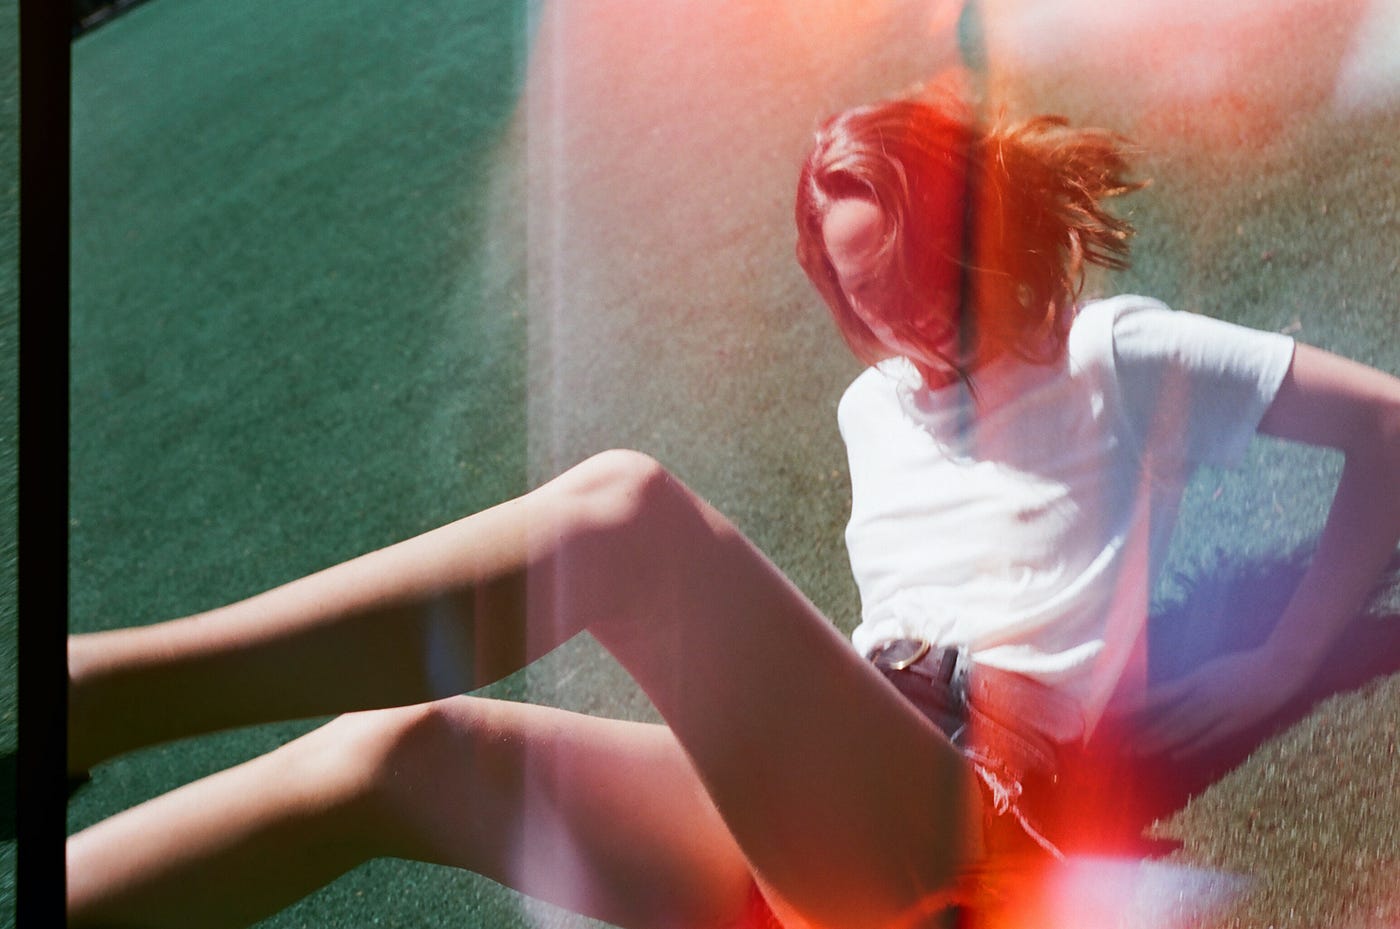 A young woman reclines on grass, face hidden by her hair. An overexposure/double-exposure effect has been added to the photo.